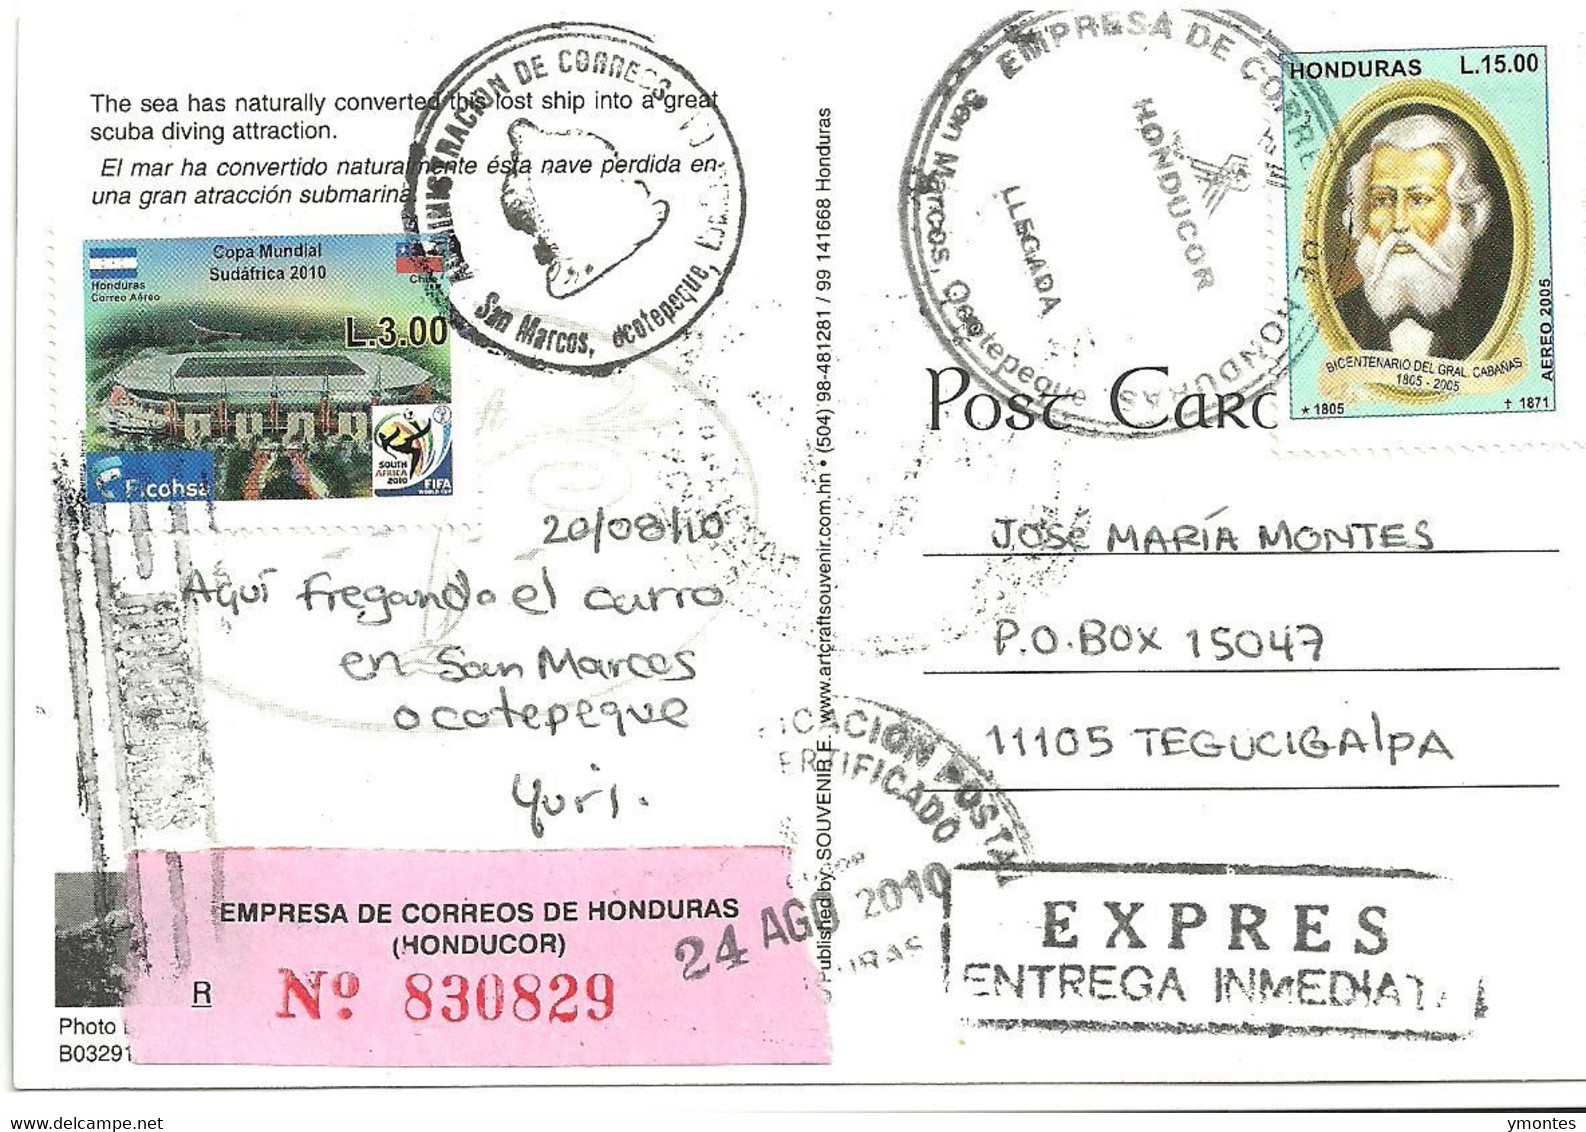 Circulated San Marcos De Ocotepeque To Tegucigalpa 2010, World Soccer South Africa 2010 And Chile Flag Stamps - Honduras